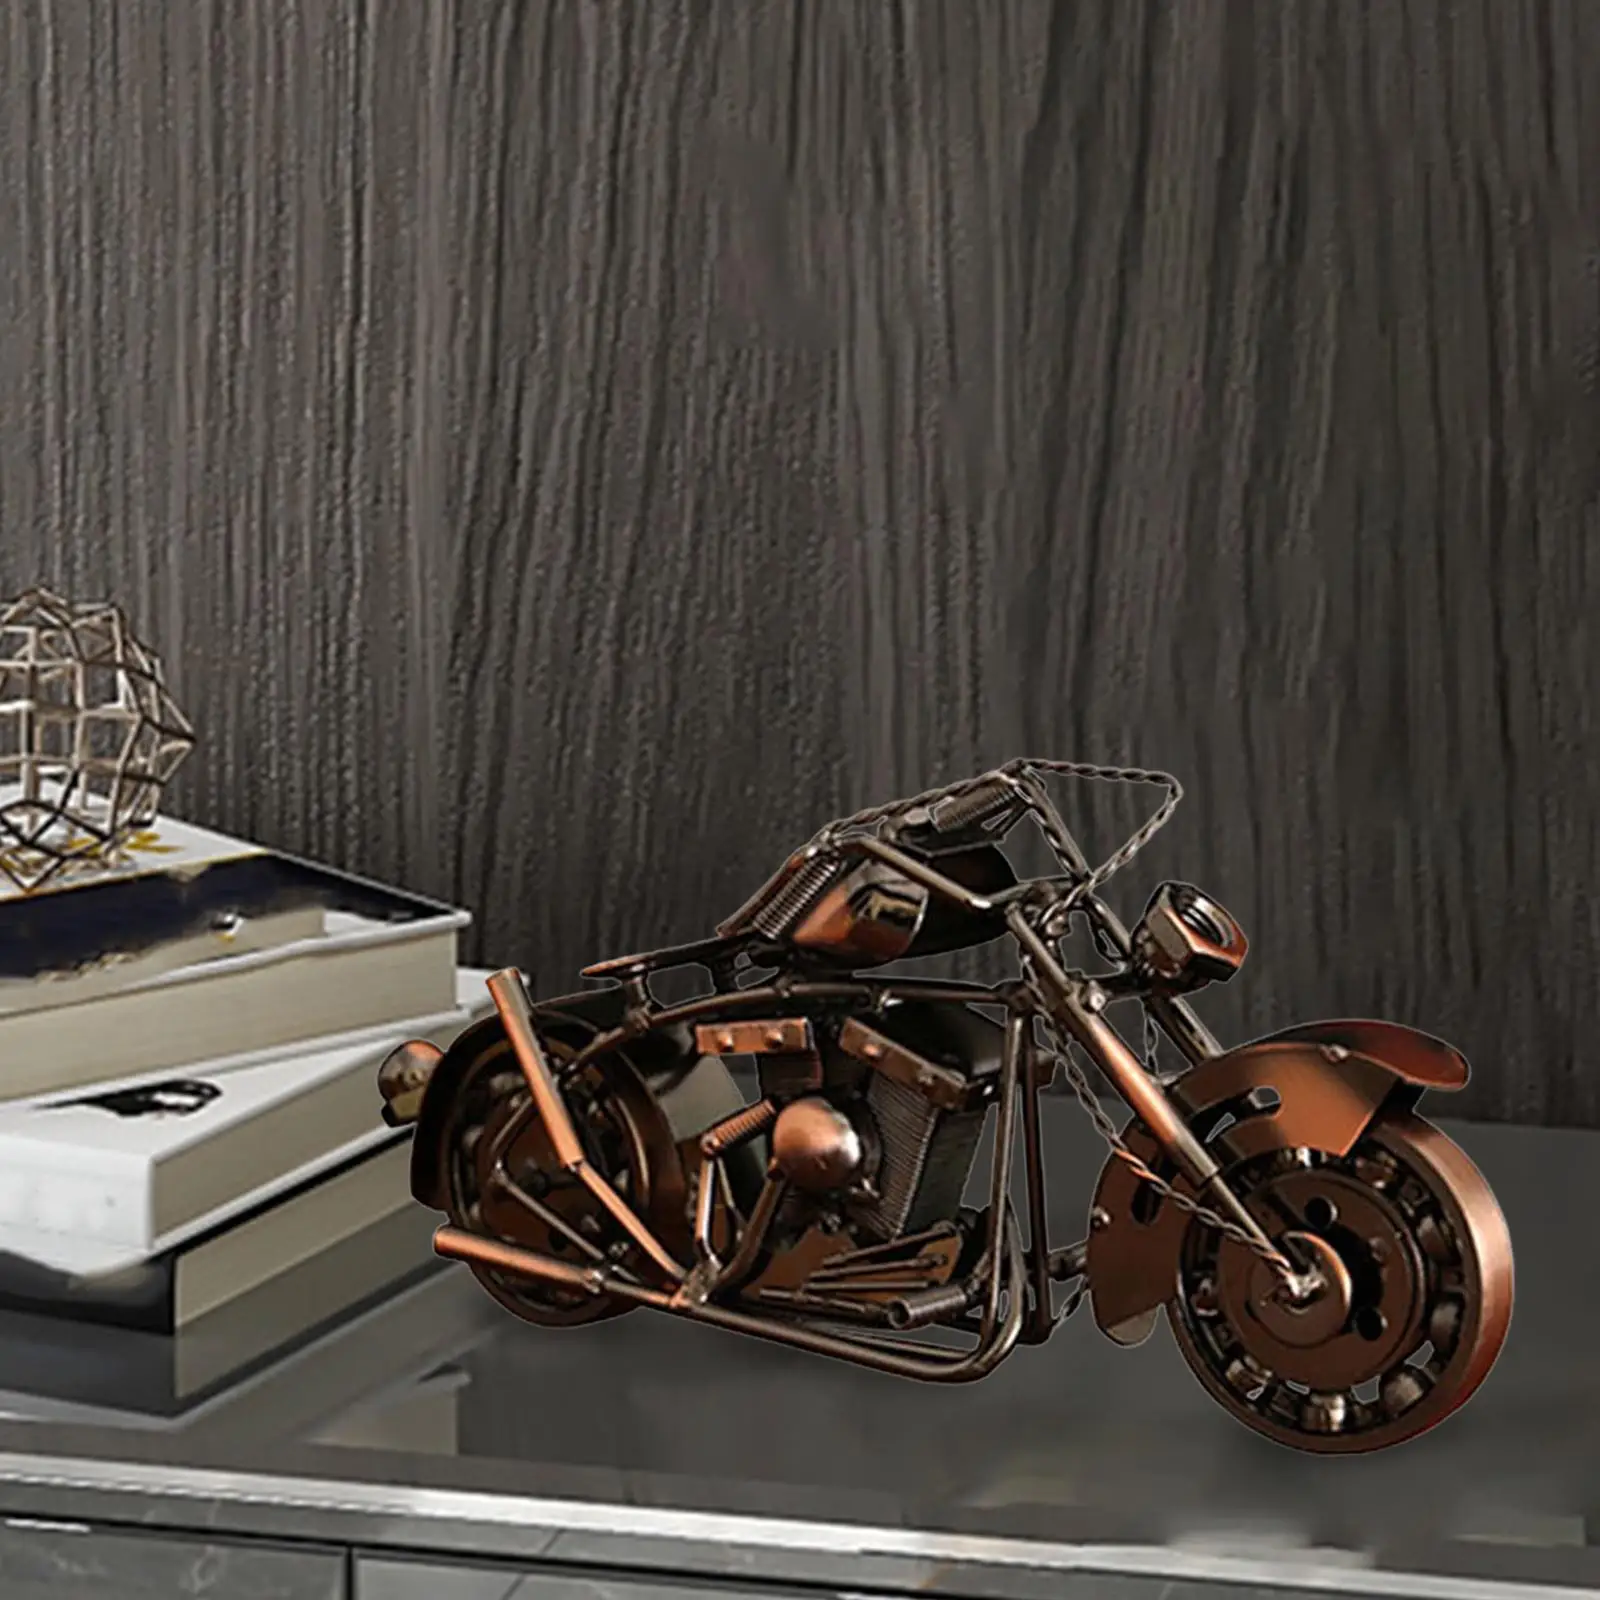 Metal Retro Motorcycle Figurine Statue Craft Collection for Gift Home Decor